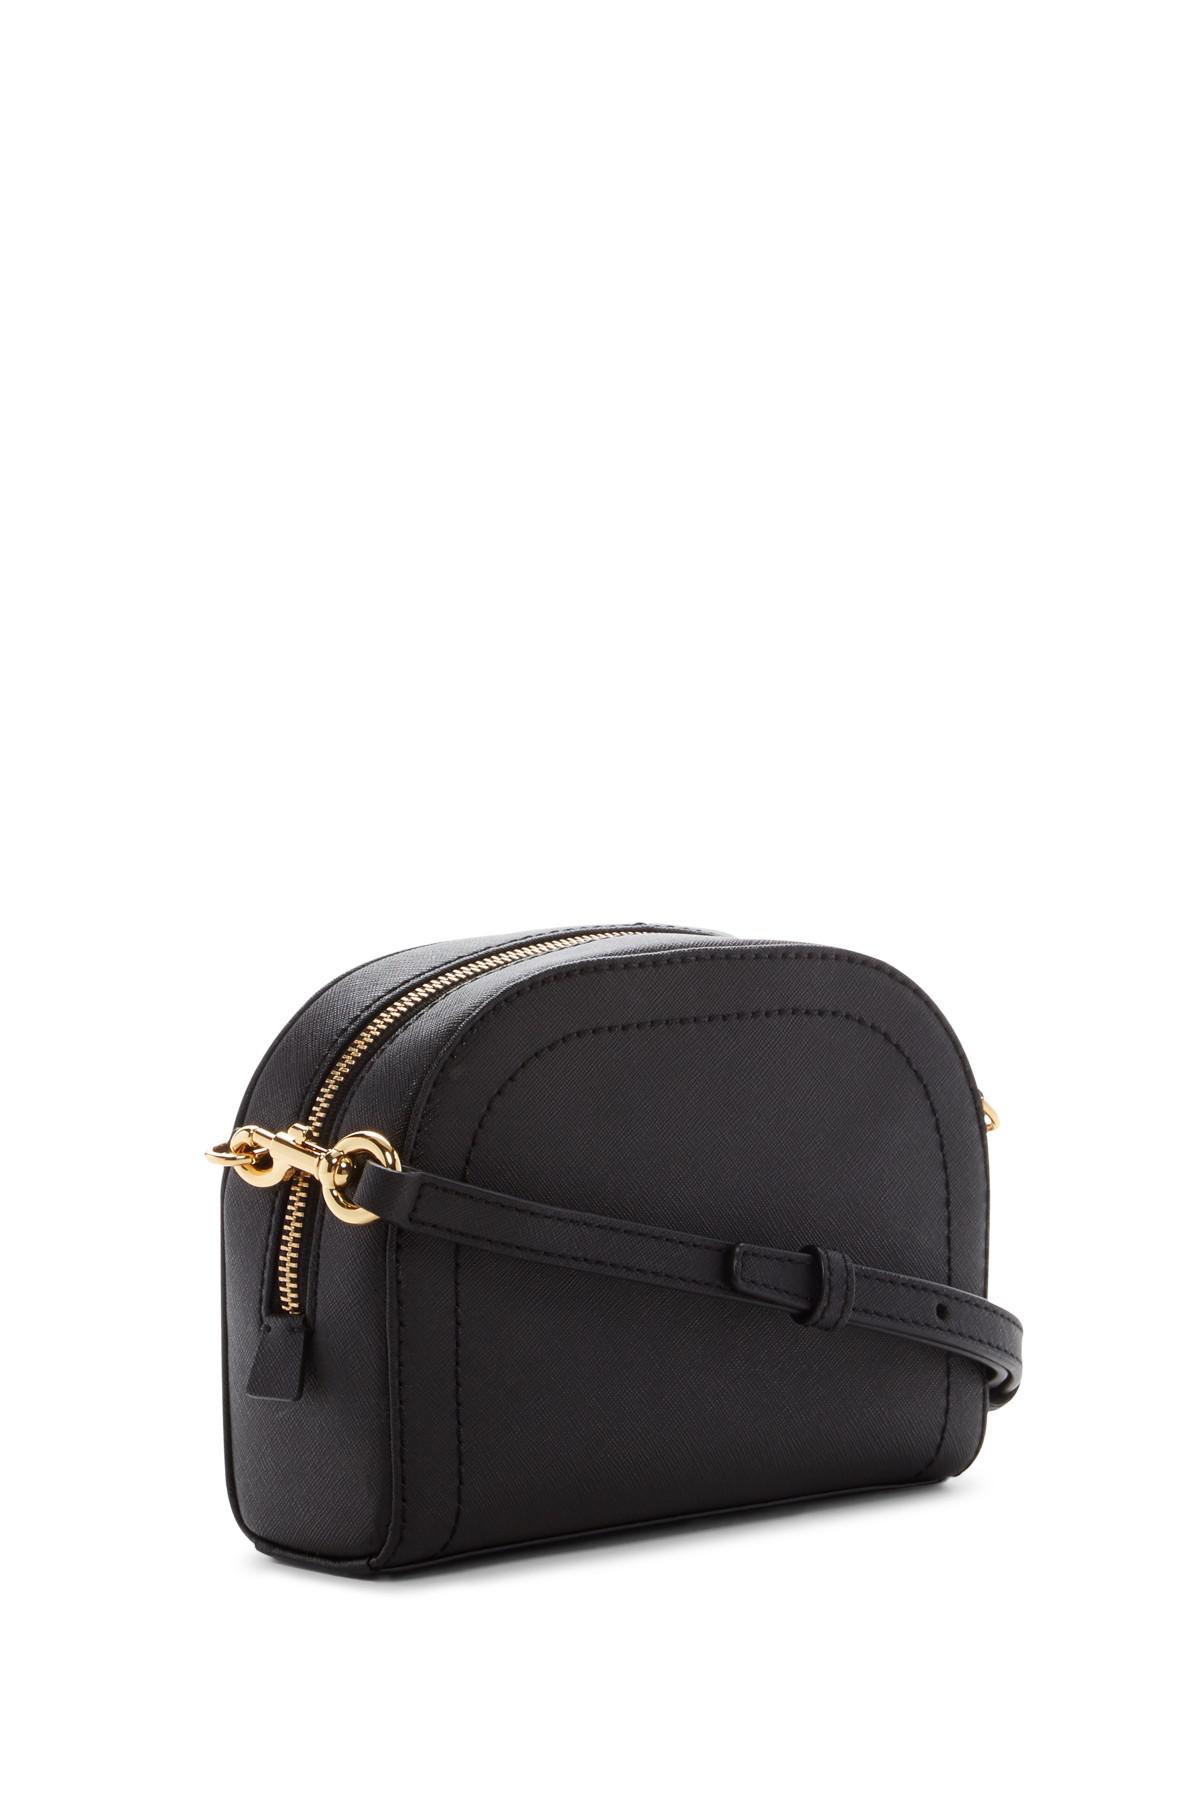 Marc Jacobs Playback Leather Crossbody Bag in Black - Lyst